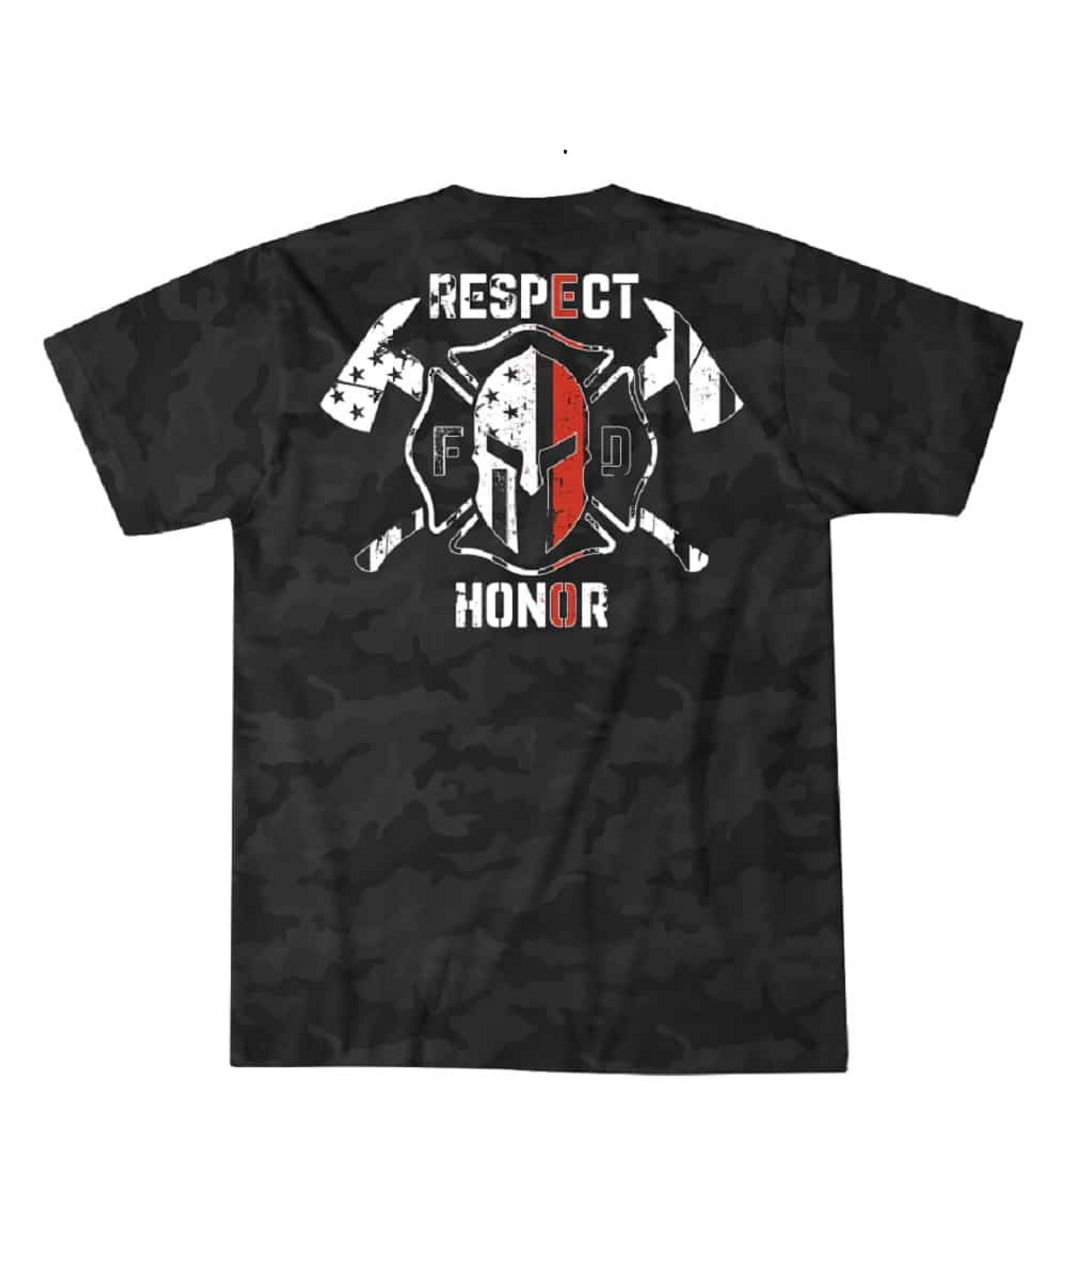 Howitzer Respect Fire T-Shirt - Harley Davidson of Quantico